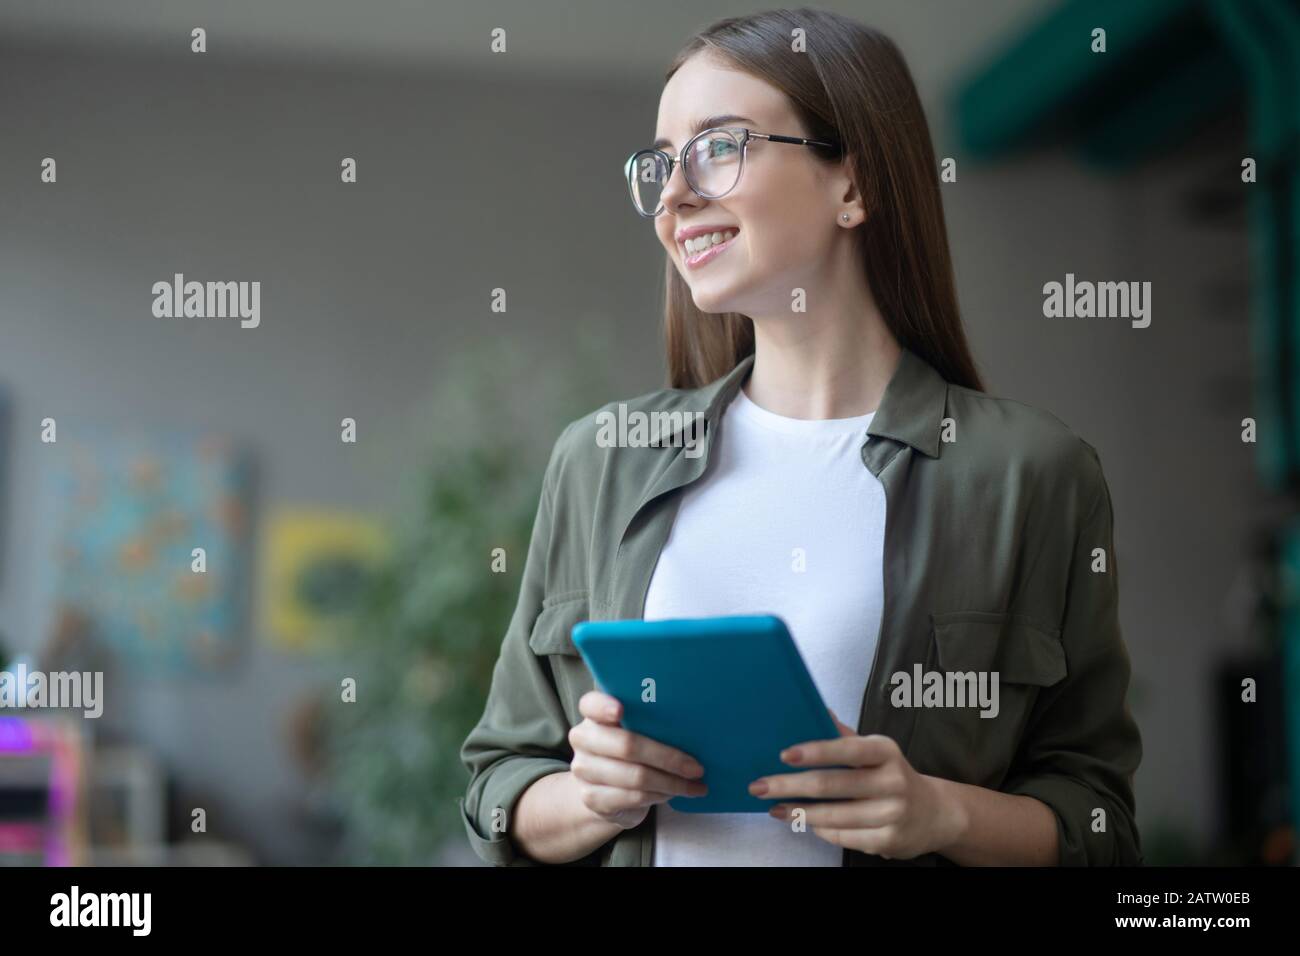 Great dreamy mood. Happy pretty girl with long dark hair in glasses with a tablet in her hands, looking to the side smiling and dreaming. Stock Photo